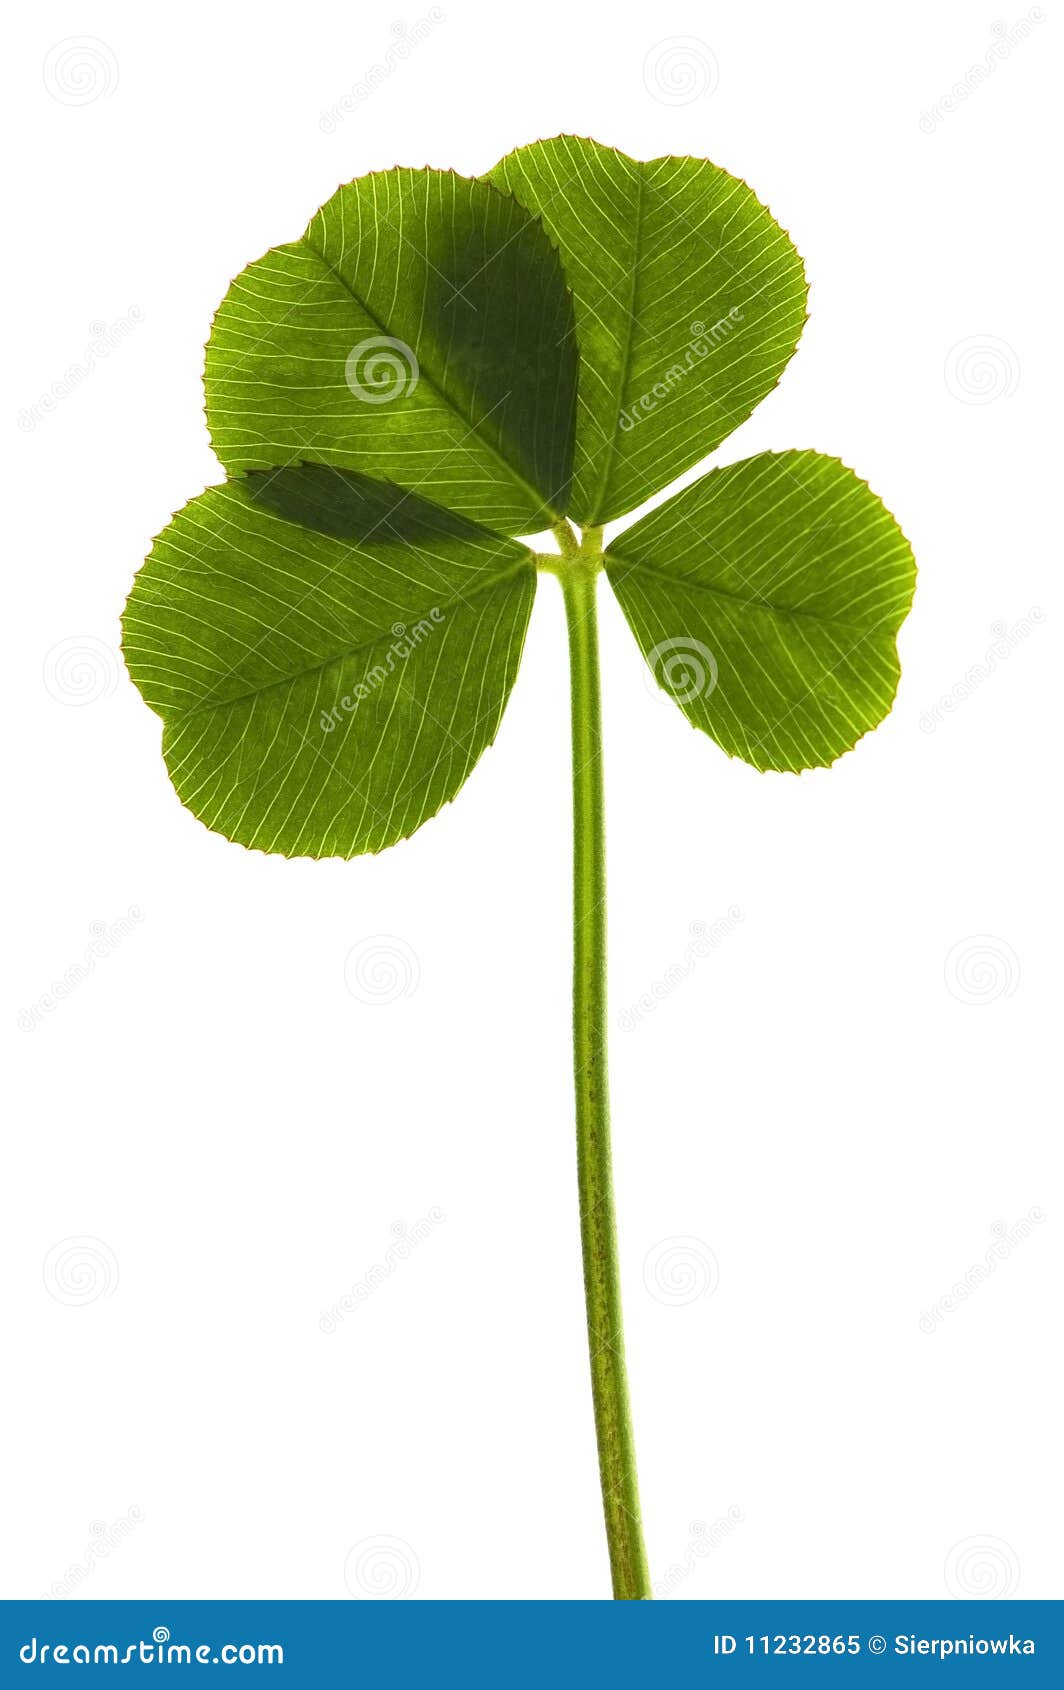 Four Leaf Clover Outline Images – Browse 6,870 Stock Photos